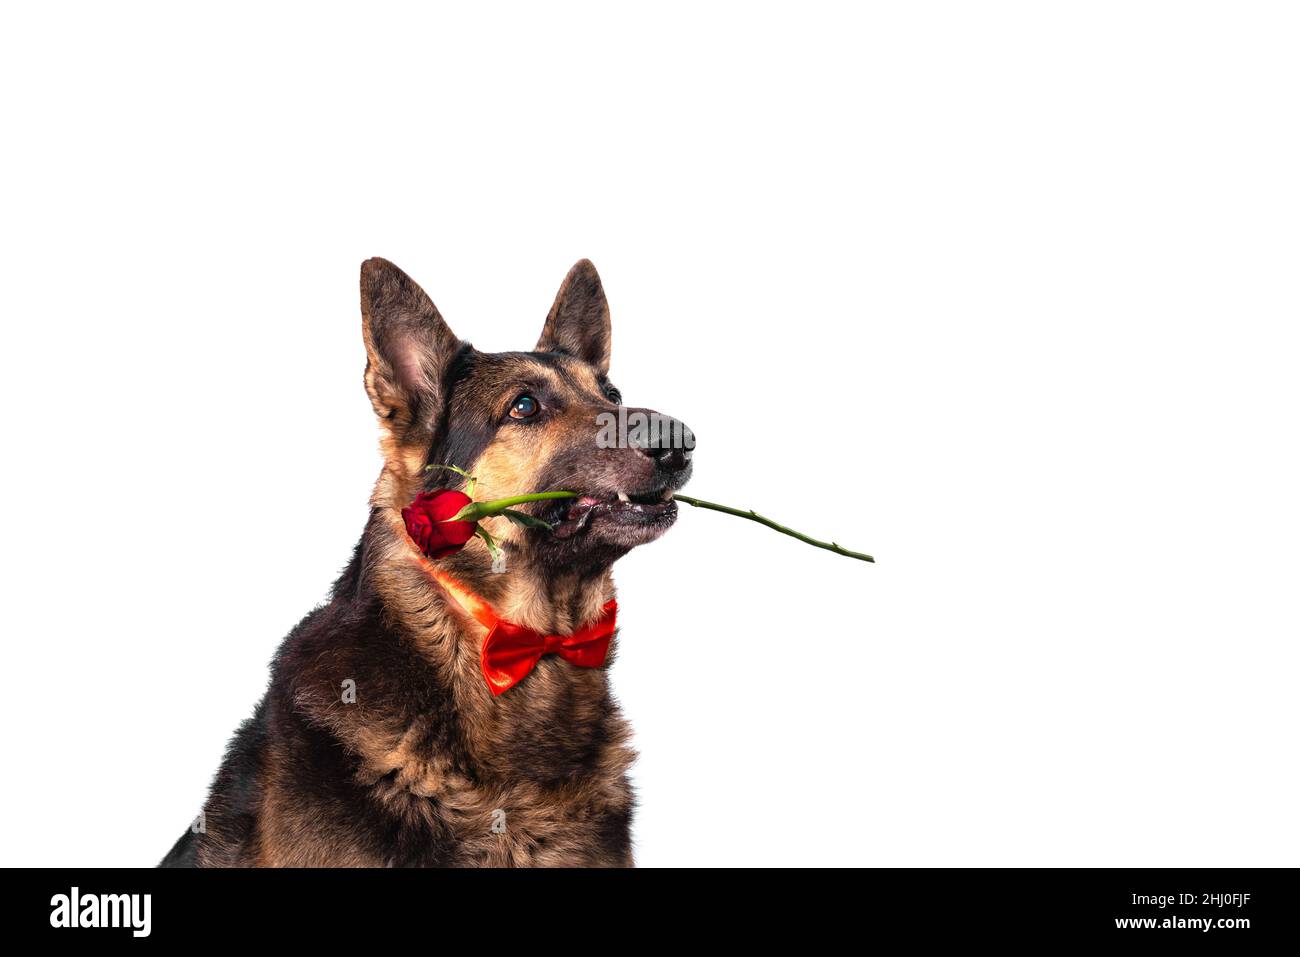 Sheepdog breed dog is dressed in a red bow tie holding a rose in his teeth isolated on white background. Stock Photo